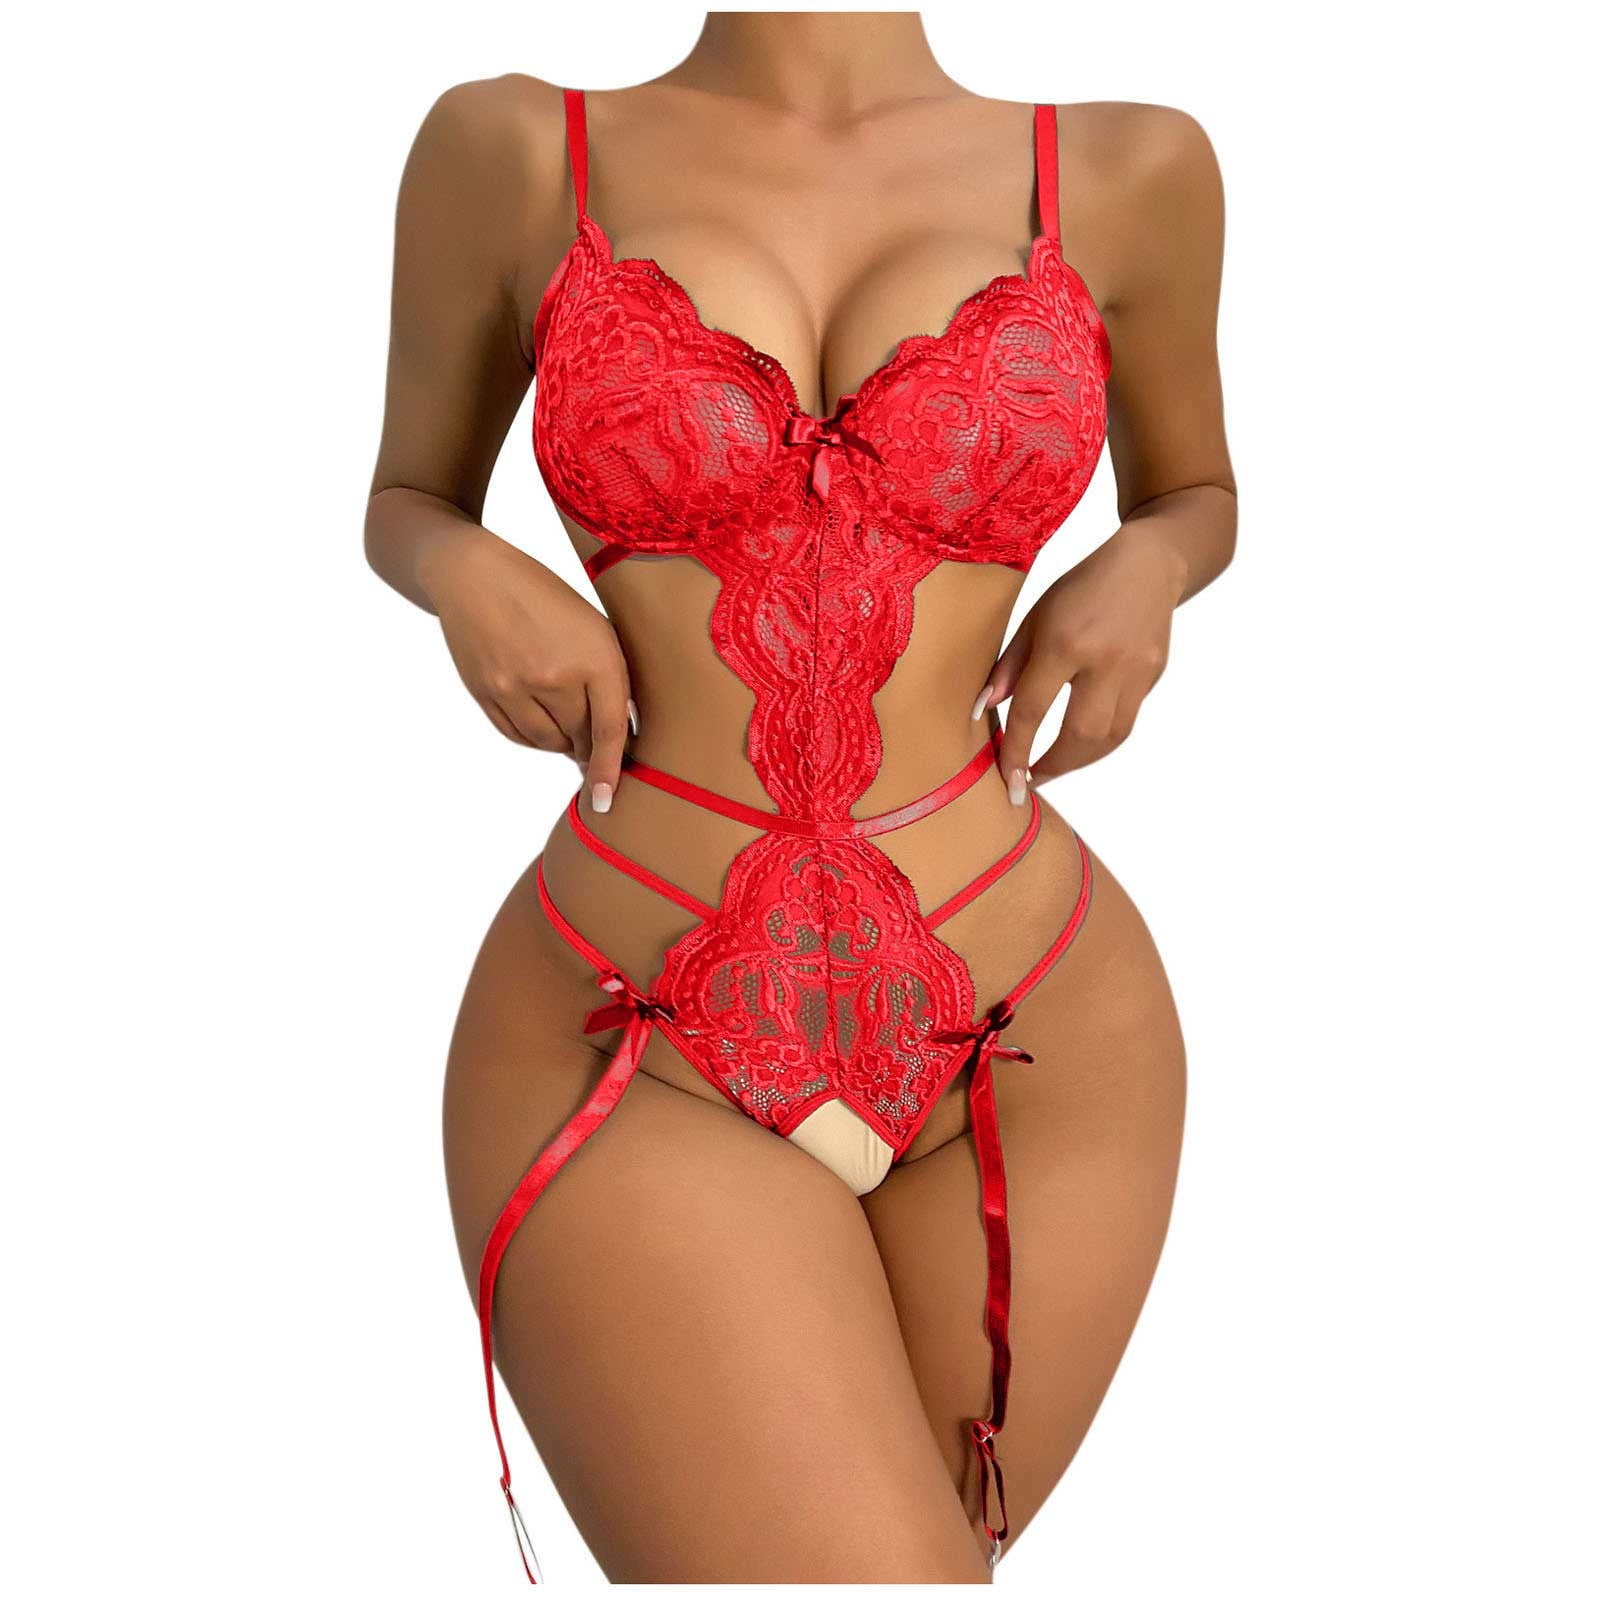 Women's Sexy Lace Red Underwear Lucky Red Temptation Mesh Hollow